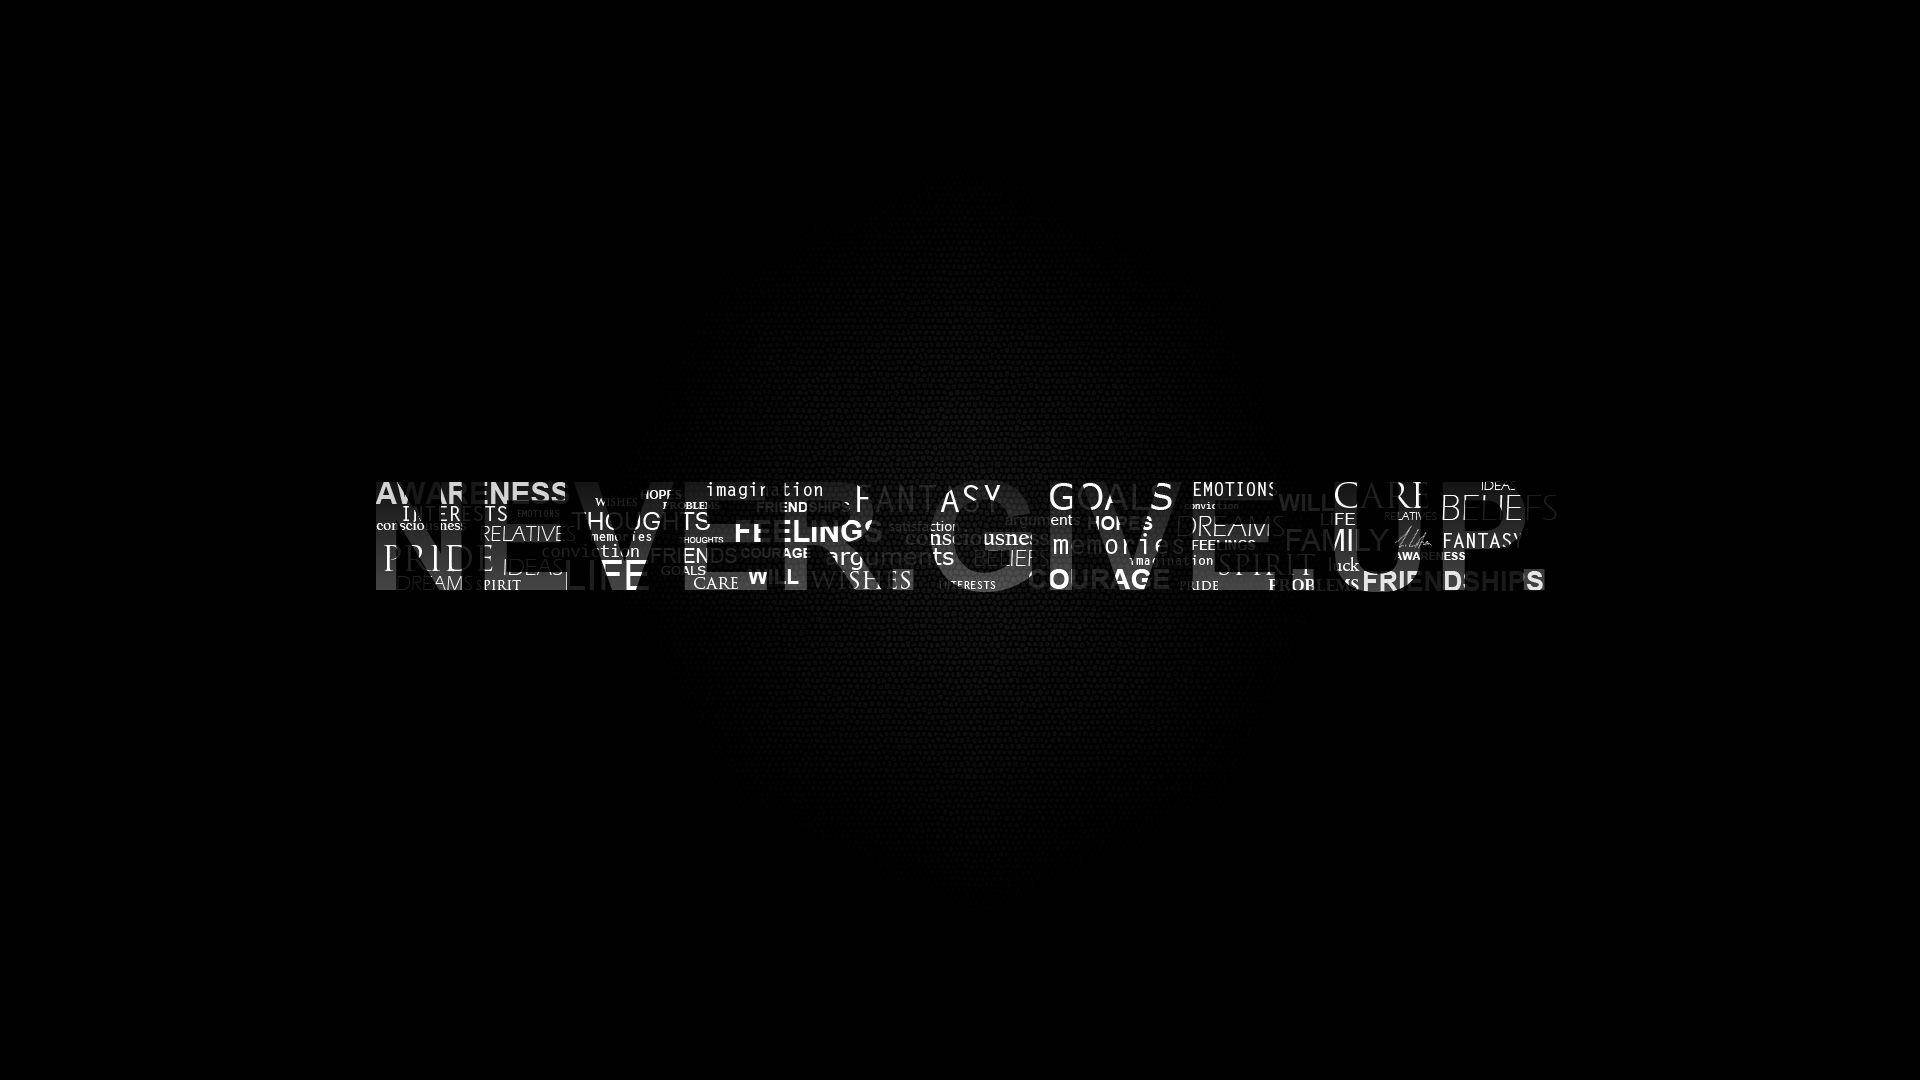 Never Give Up Word Collage Wallpaper